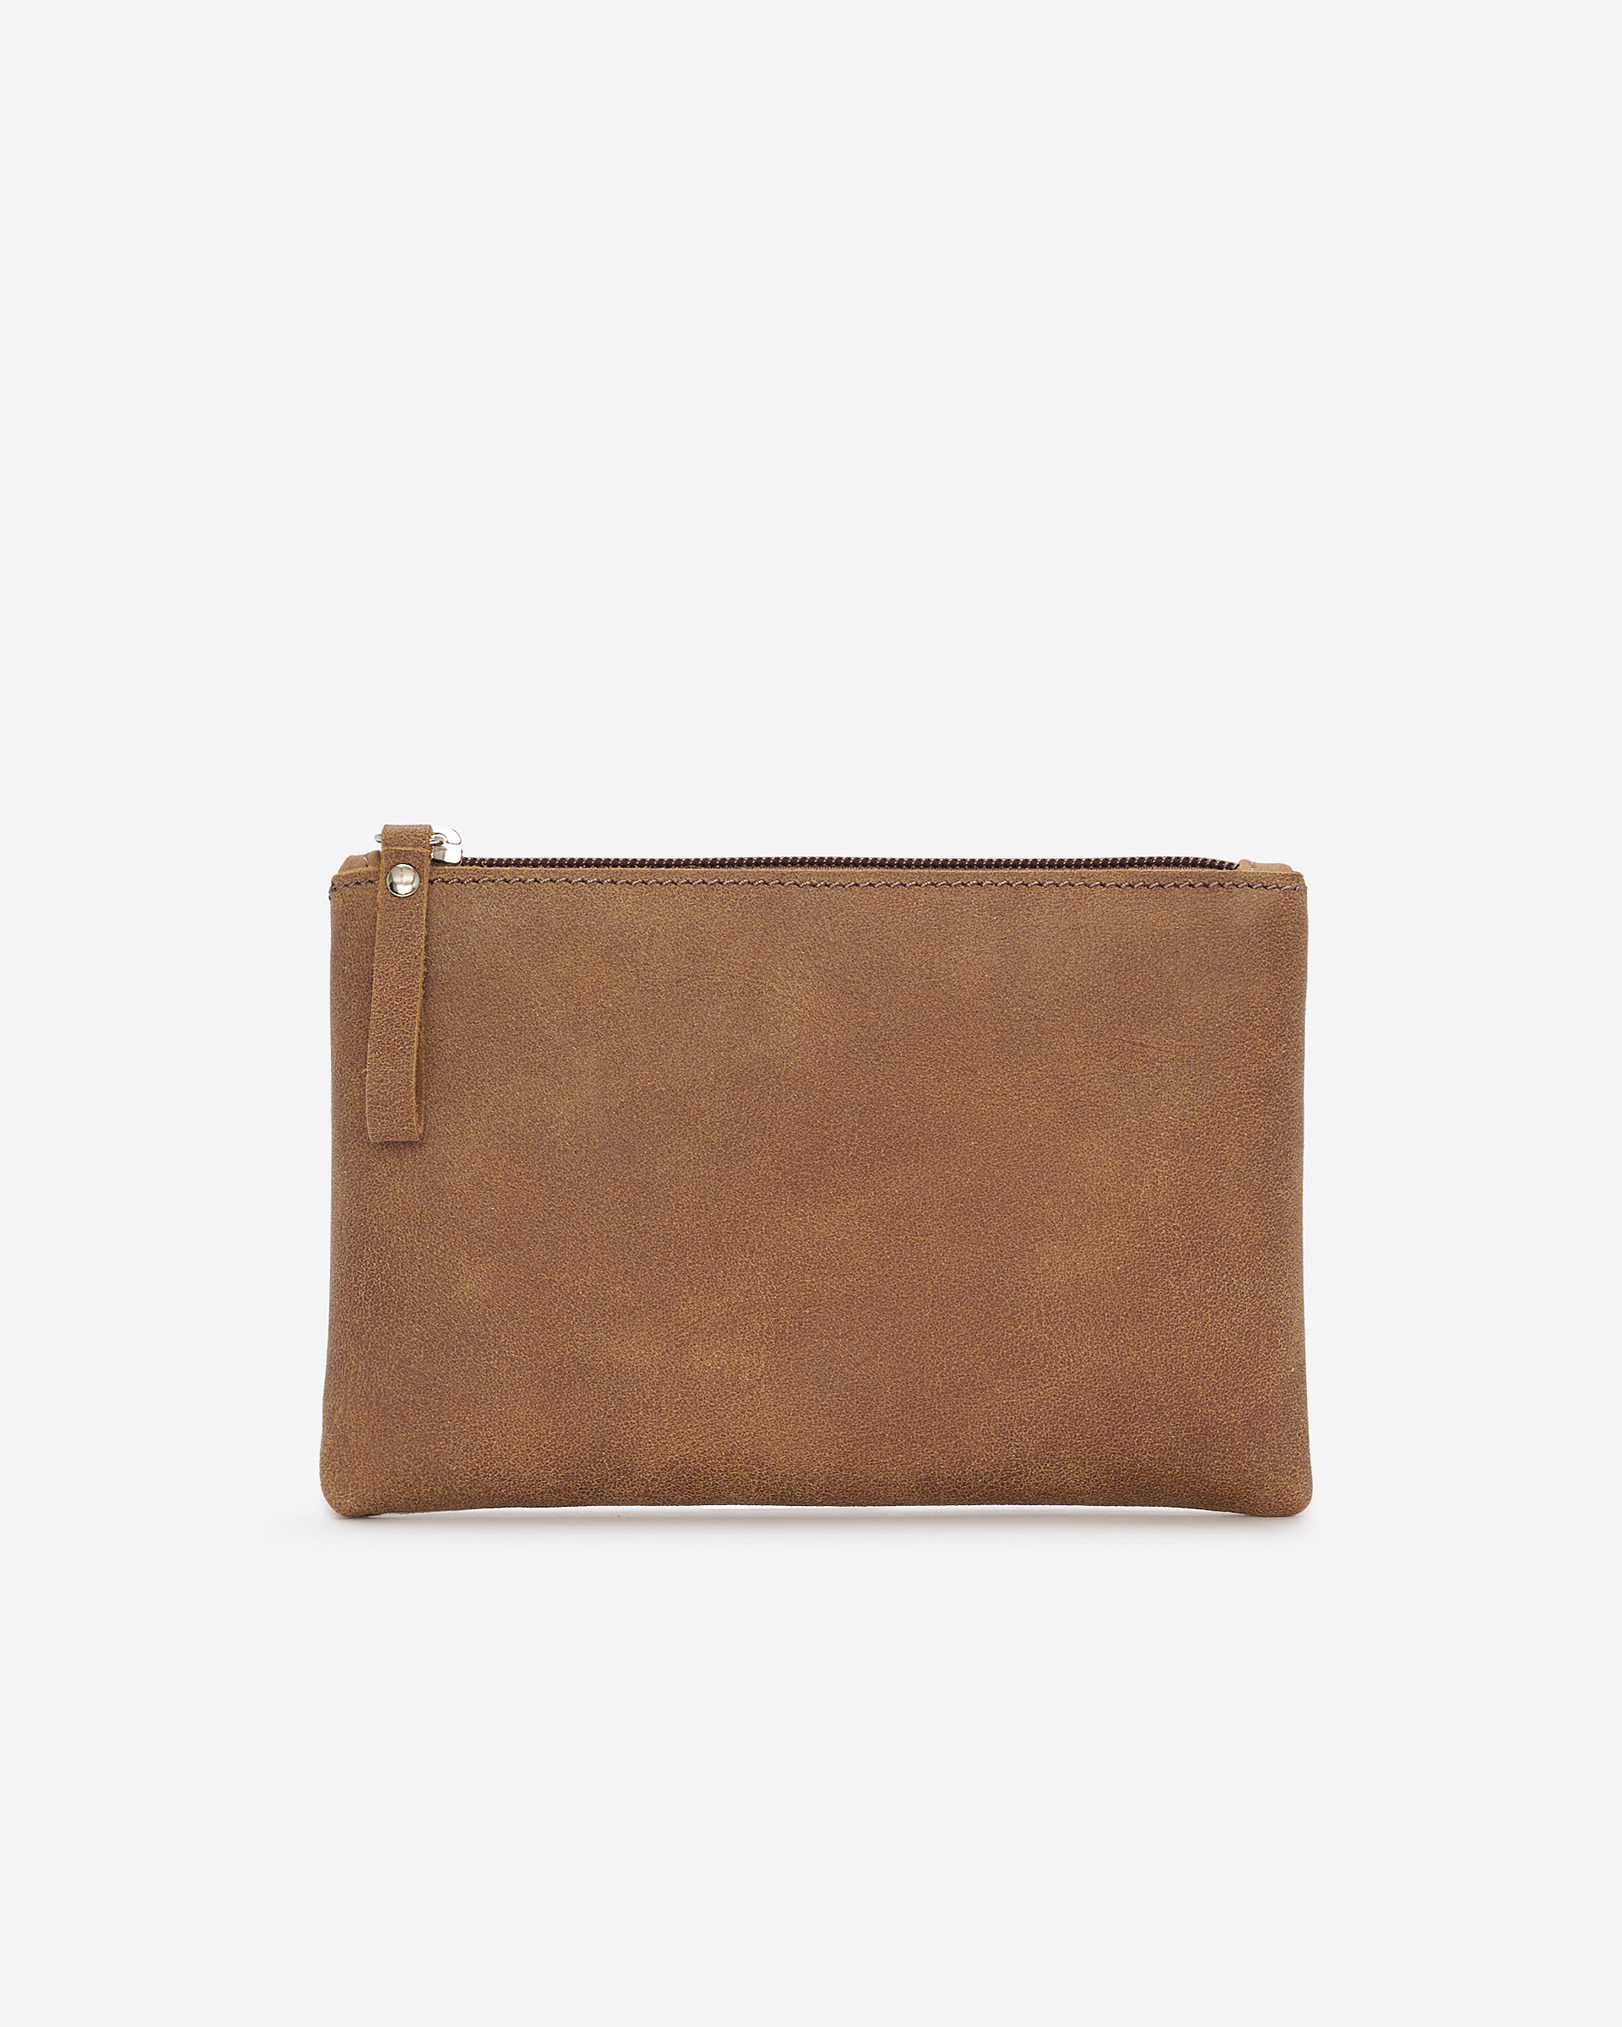 Roots Zip Pouch Tribe in Natural